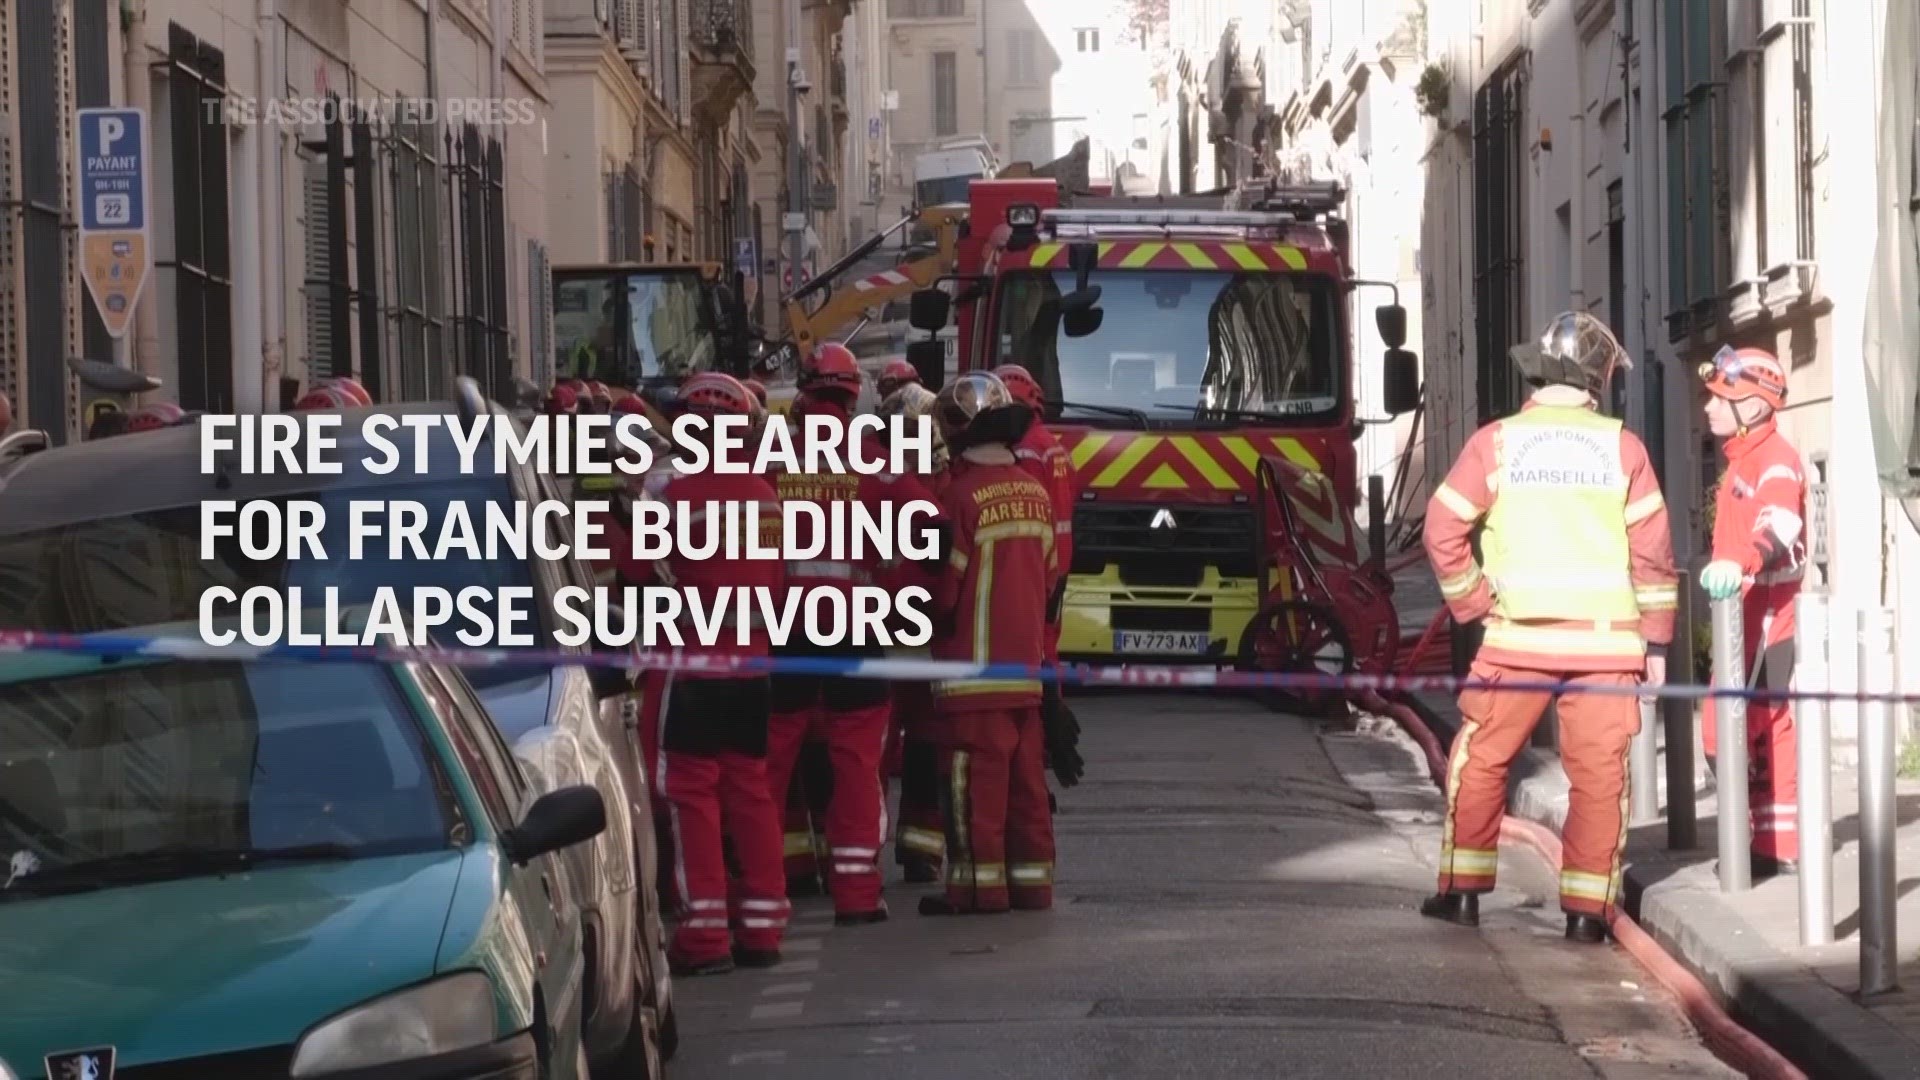 Up to 10 people may be buried under the debris of a building that collapsed early on Sunday following an explosion in Marseille, France.